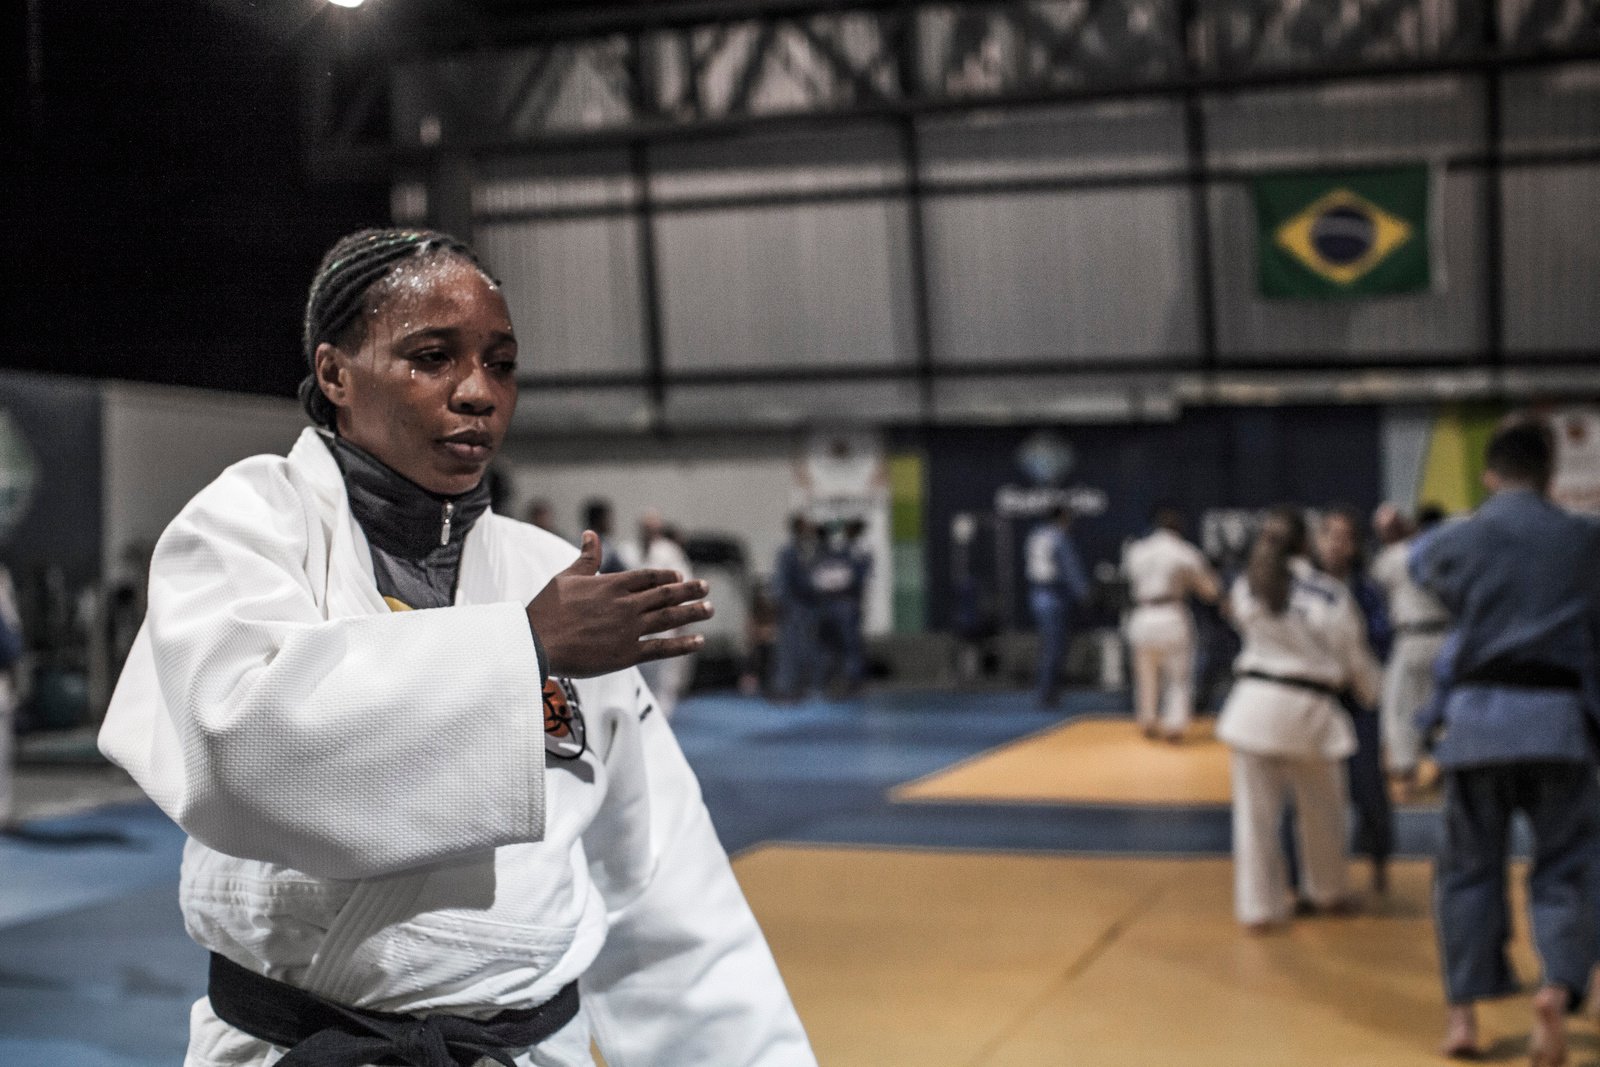 Brazil. Refugee Olympic Team training to compete in Rio